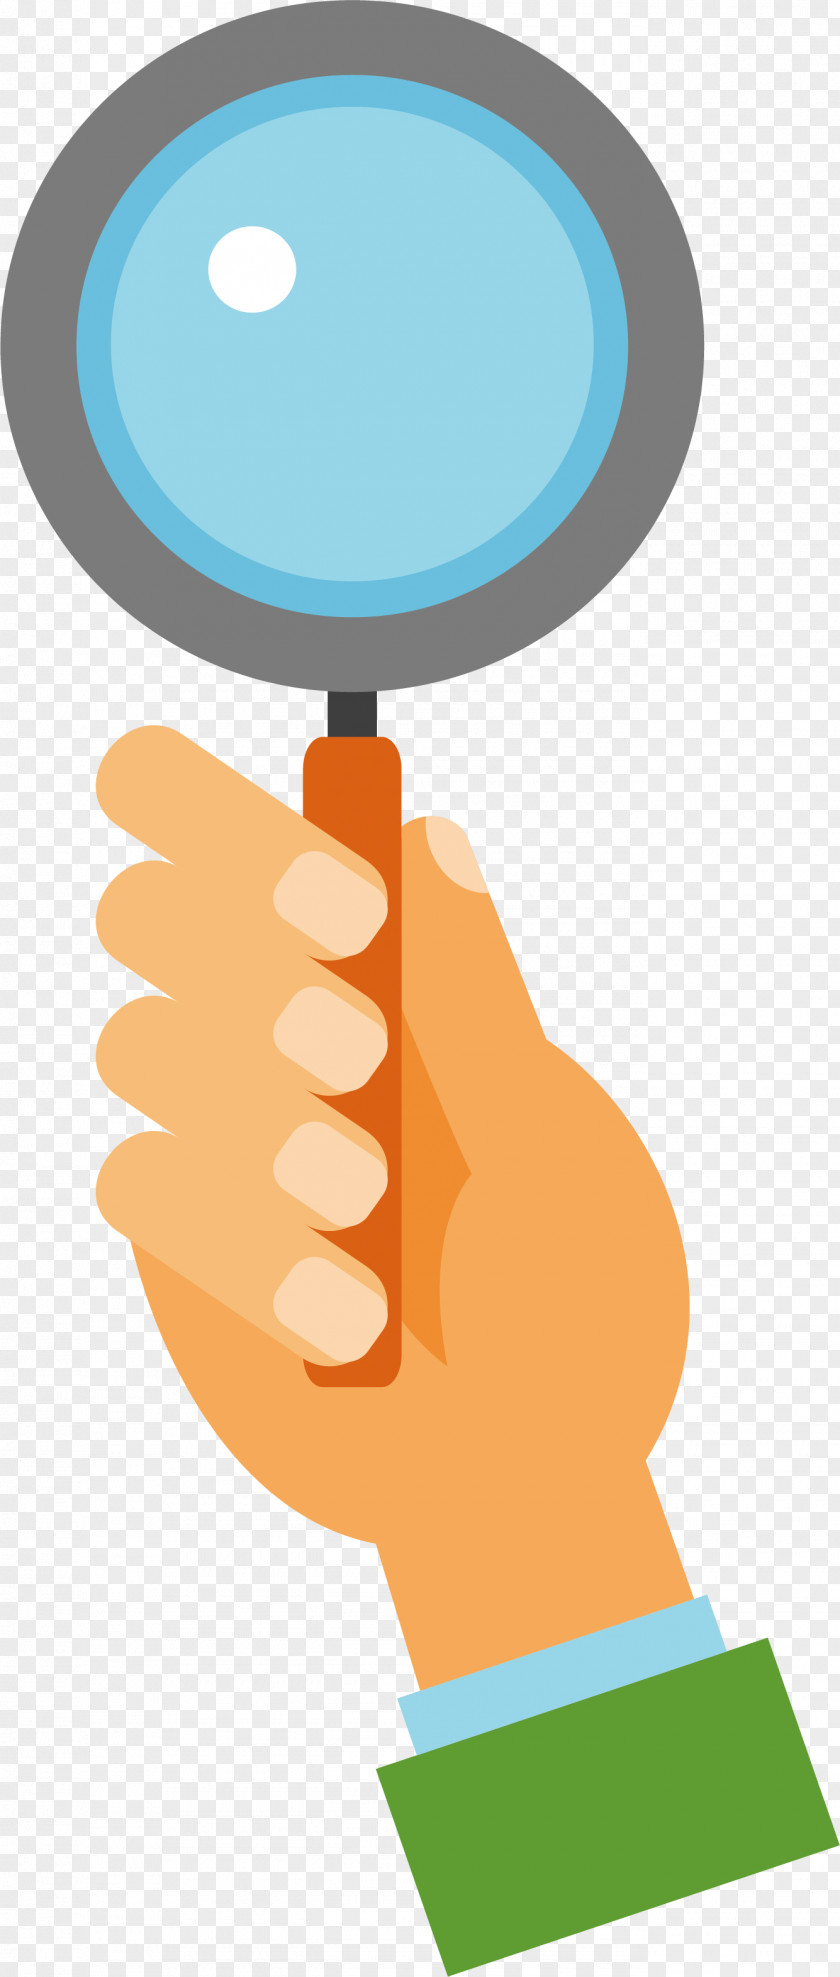 Hold A Magnifying Glass In Your Hand Computer File PNG